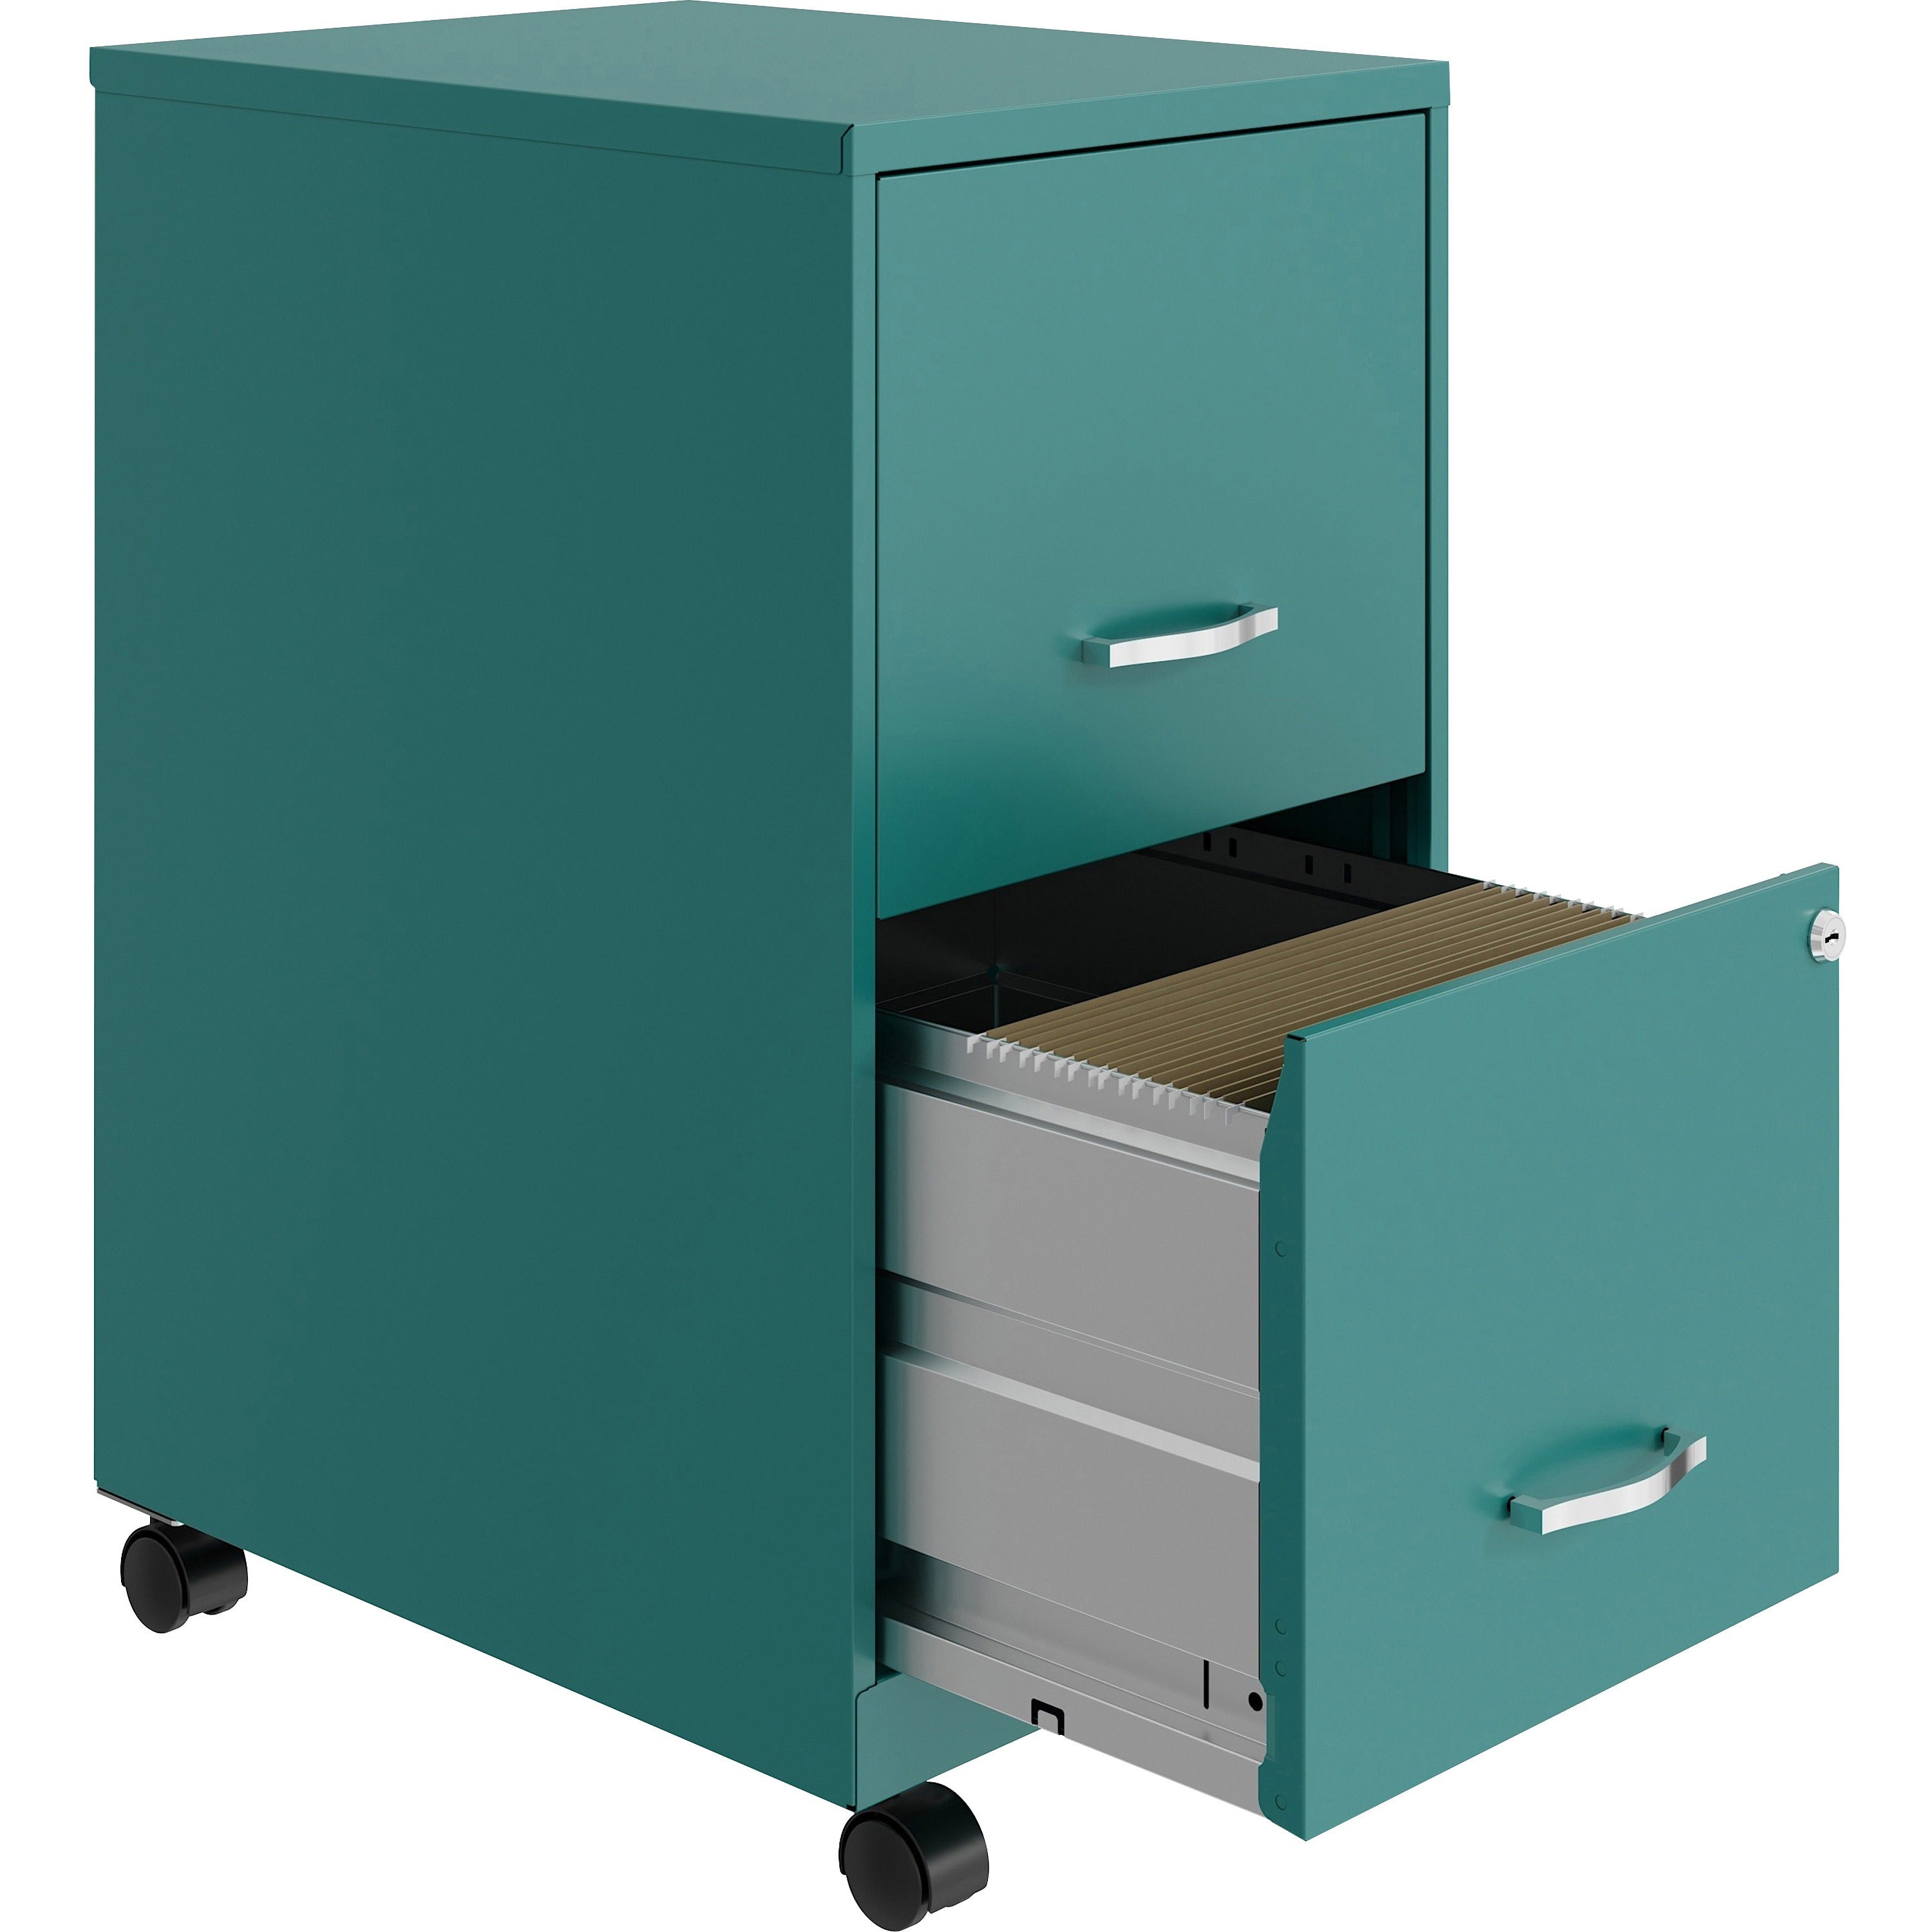 nusparc-mobile-file-cabinet-142-x-18-x-265-for-file-letter-mobility-locking-drawer-glide-suspension-3-4-drawer-extension-cam-lock-nonporous-surface-teal-painted-steel-steel-recycled_nprvf218amtl - 4